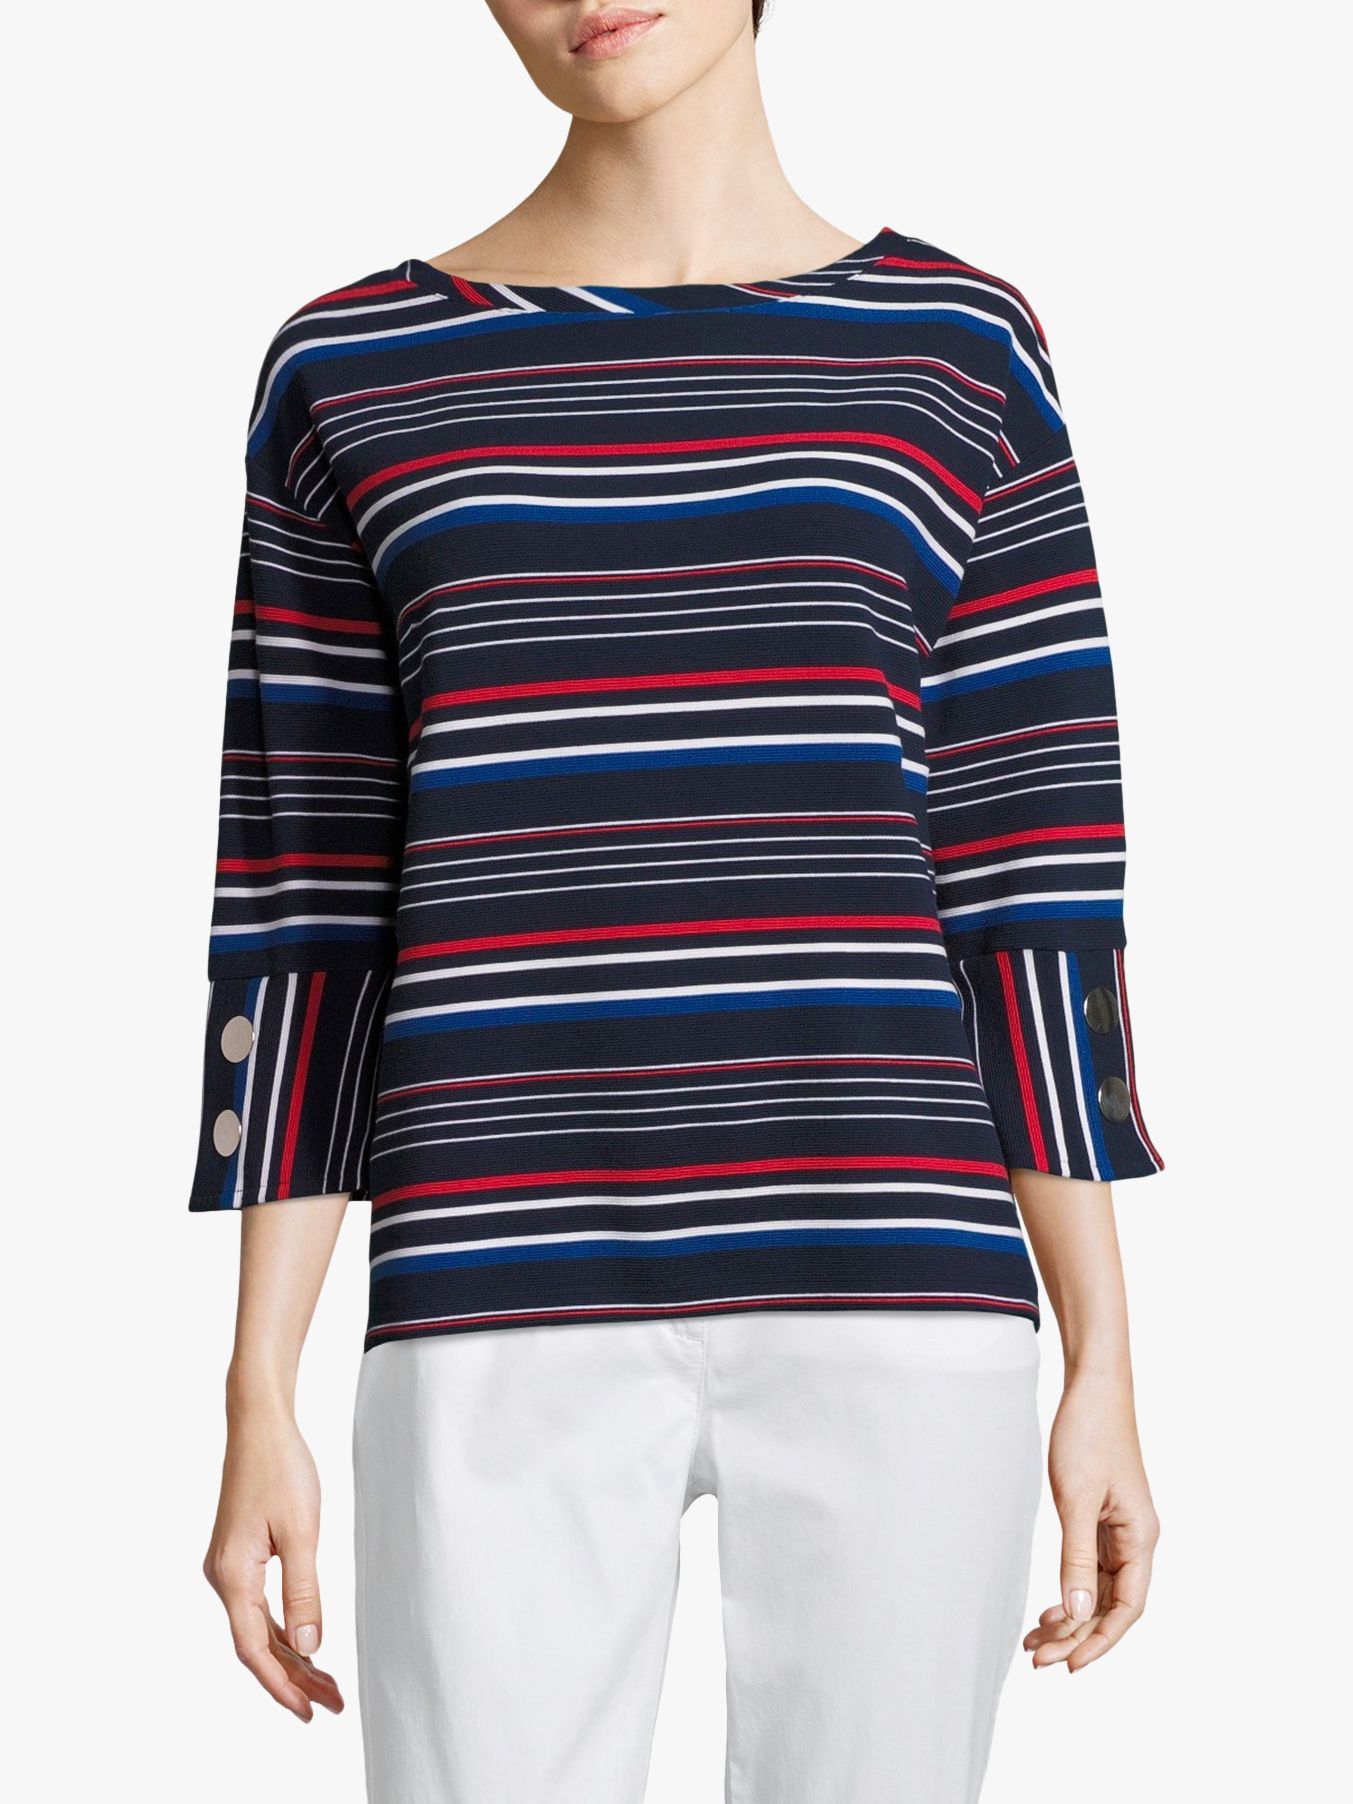 Betty Barclay Ribbed Button Striped Jersey Top, Dark Blue/Red